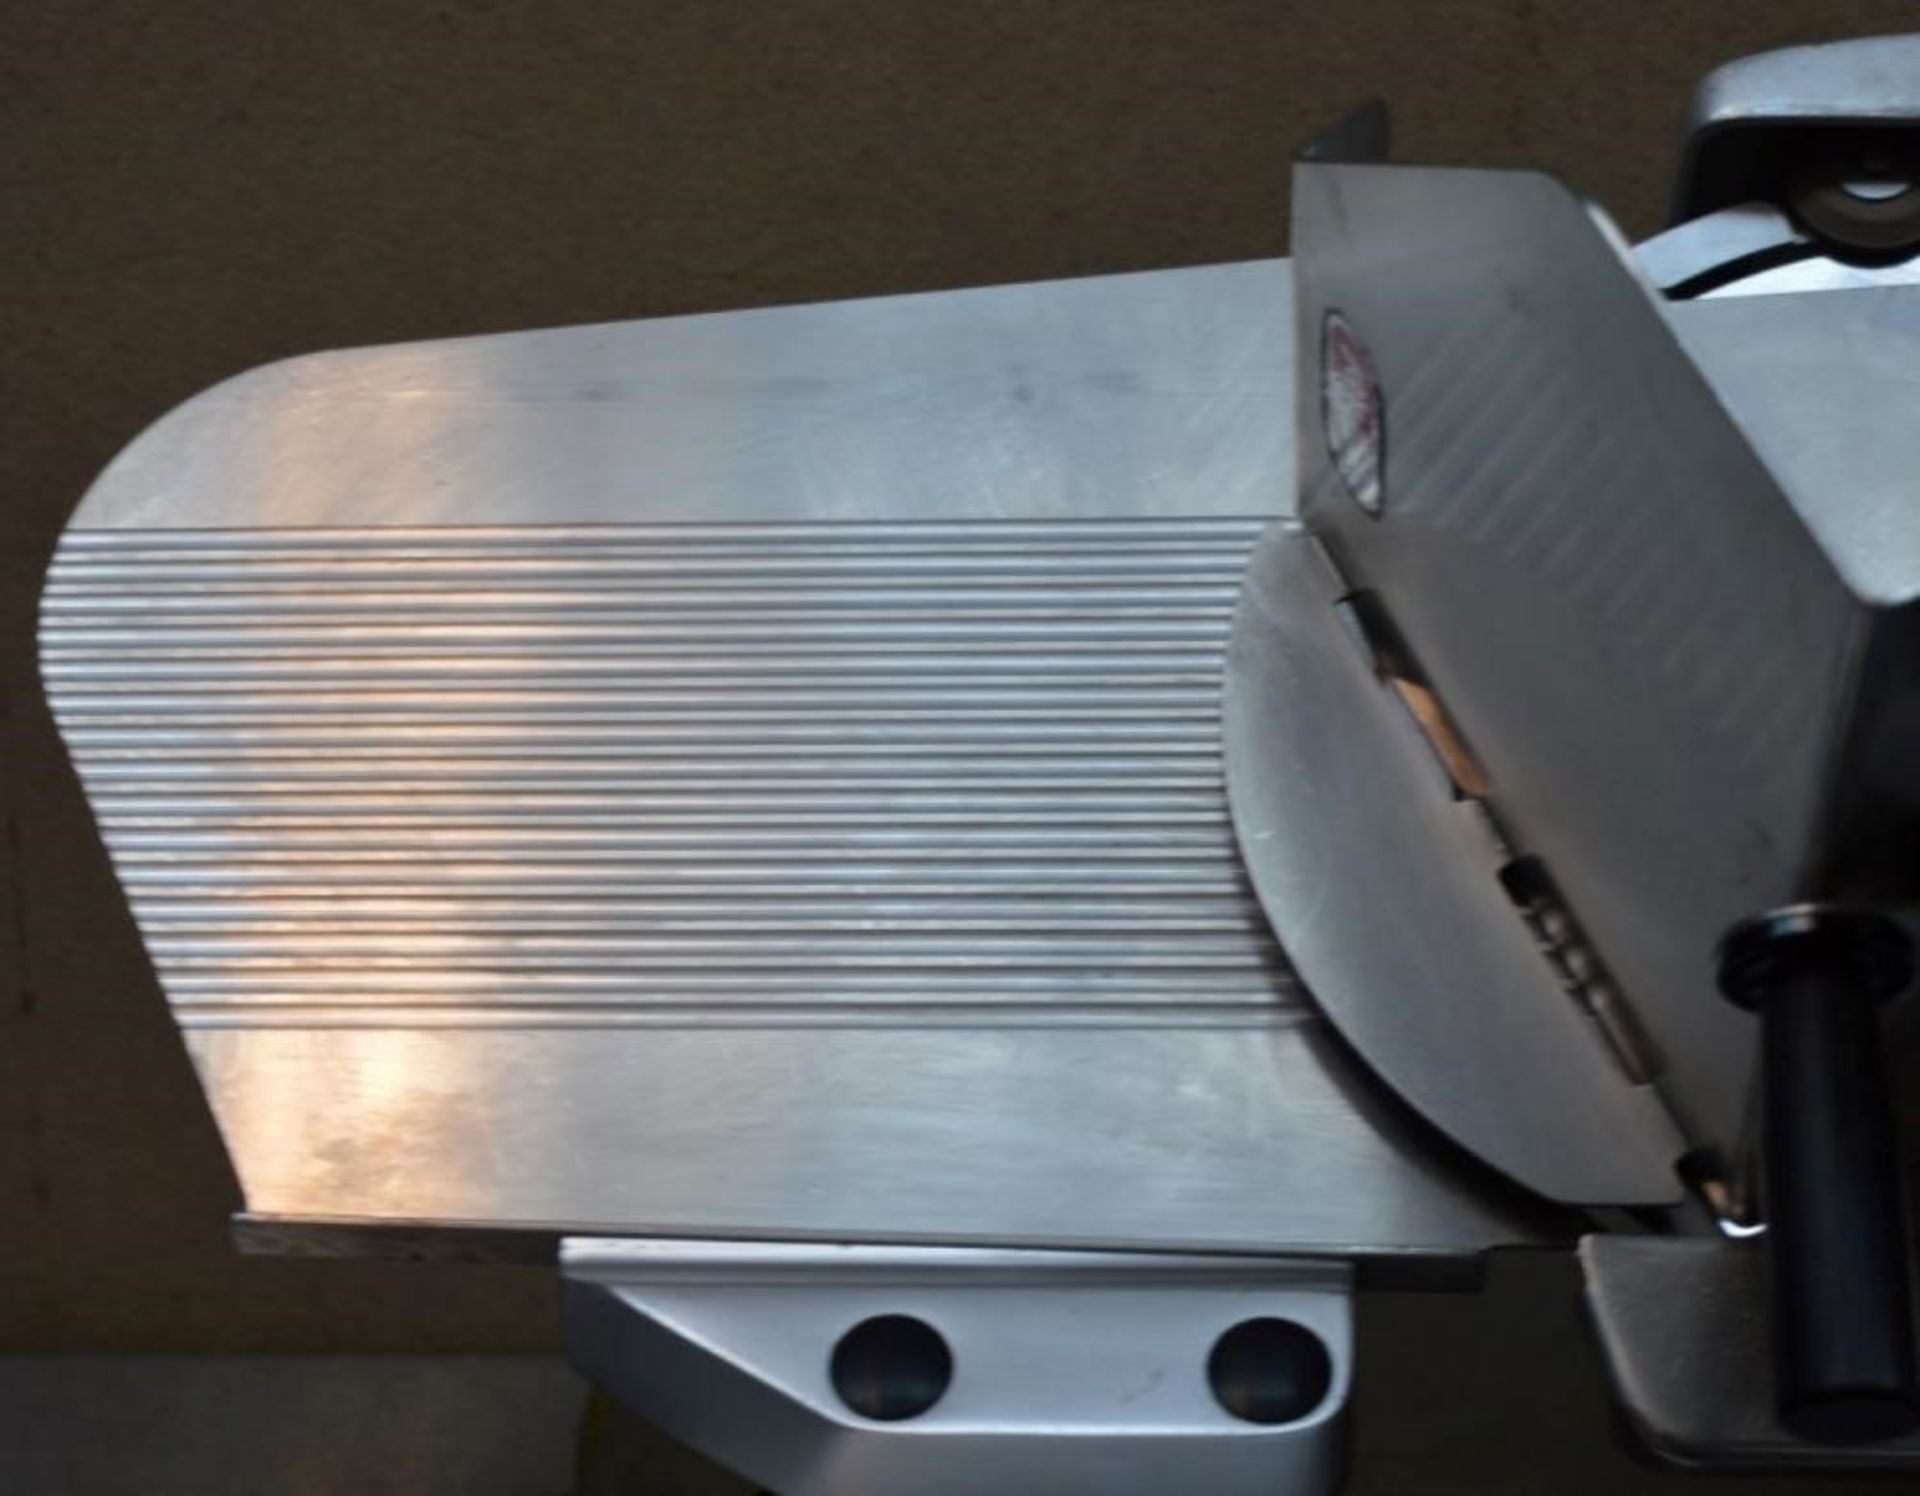 1 x Berkel 800S 12" Commercial Cooked Meat / Bacon Slicer - 220-240v - Dimensions H58 x W72 x D48 cm - Image 5 of 9